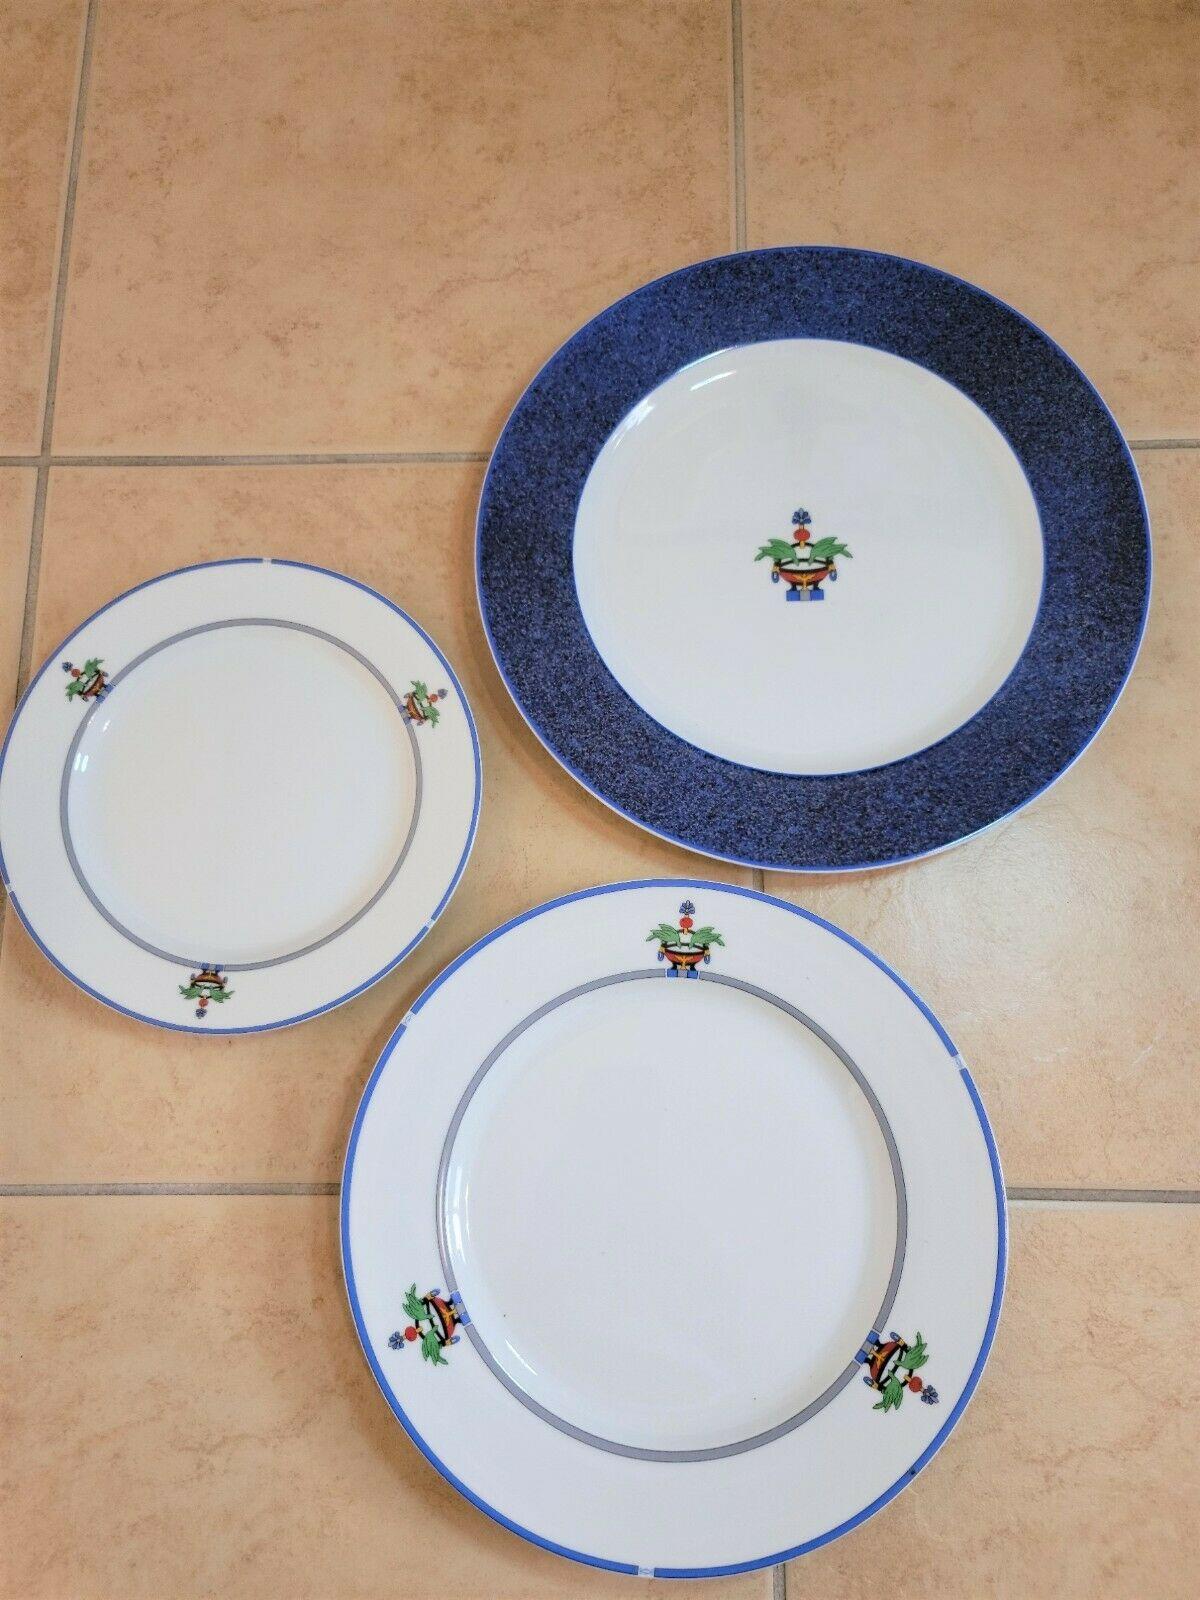 For your consideration is a stunning unique set of like-new Cartier Blue La Maison Venitienne China Set including:

12 service plates (11 ½” round)

14 dinner plates (10 ¼” round)

11 salad plates (8 ¾” round)

12 soup bowls (8: